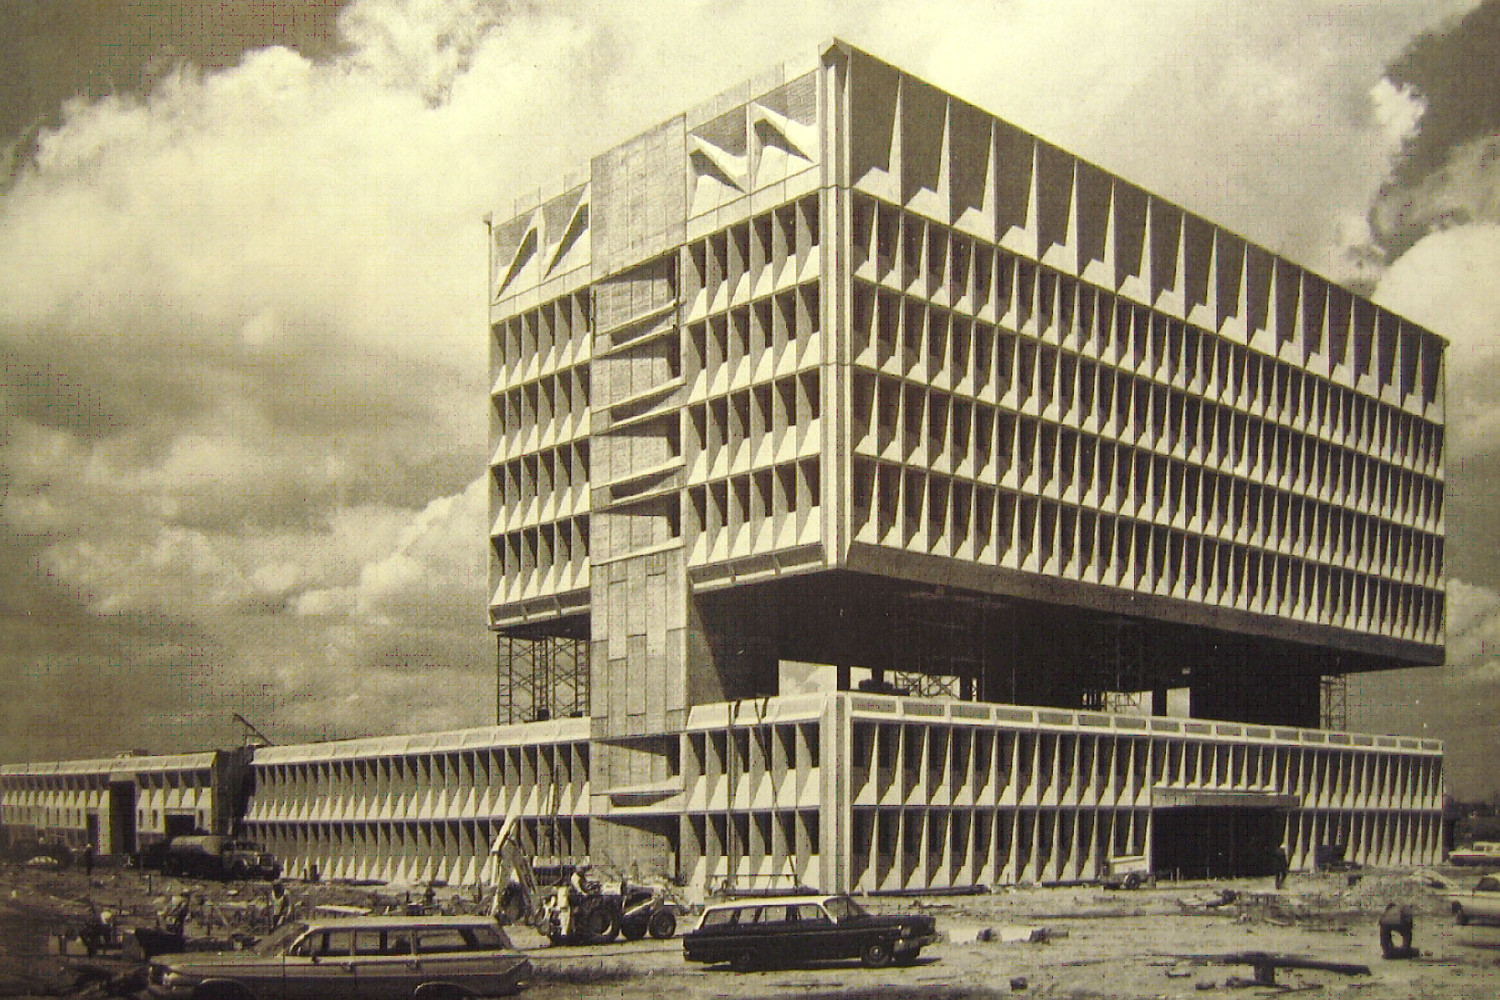 Breuer later designed and built the Pirelli Tire Company headquarters, which shared many similarities with his design for UVA. (Source: Imgur) 